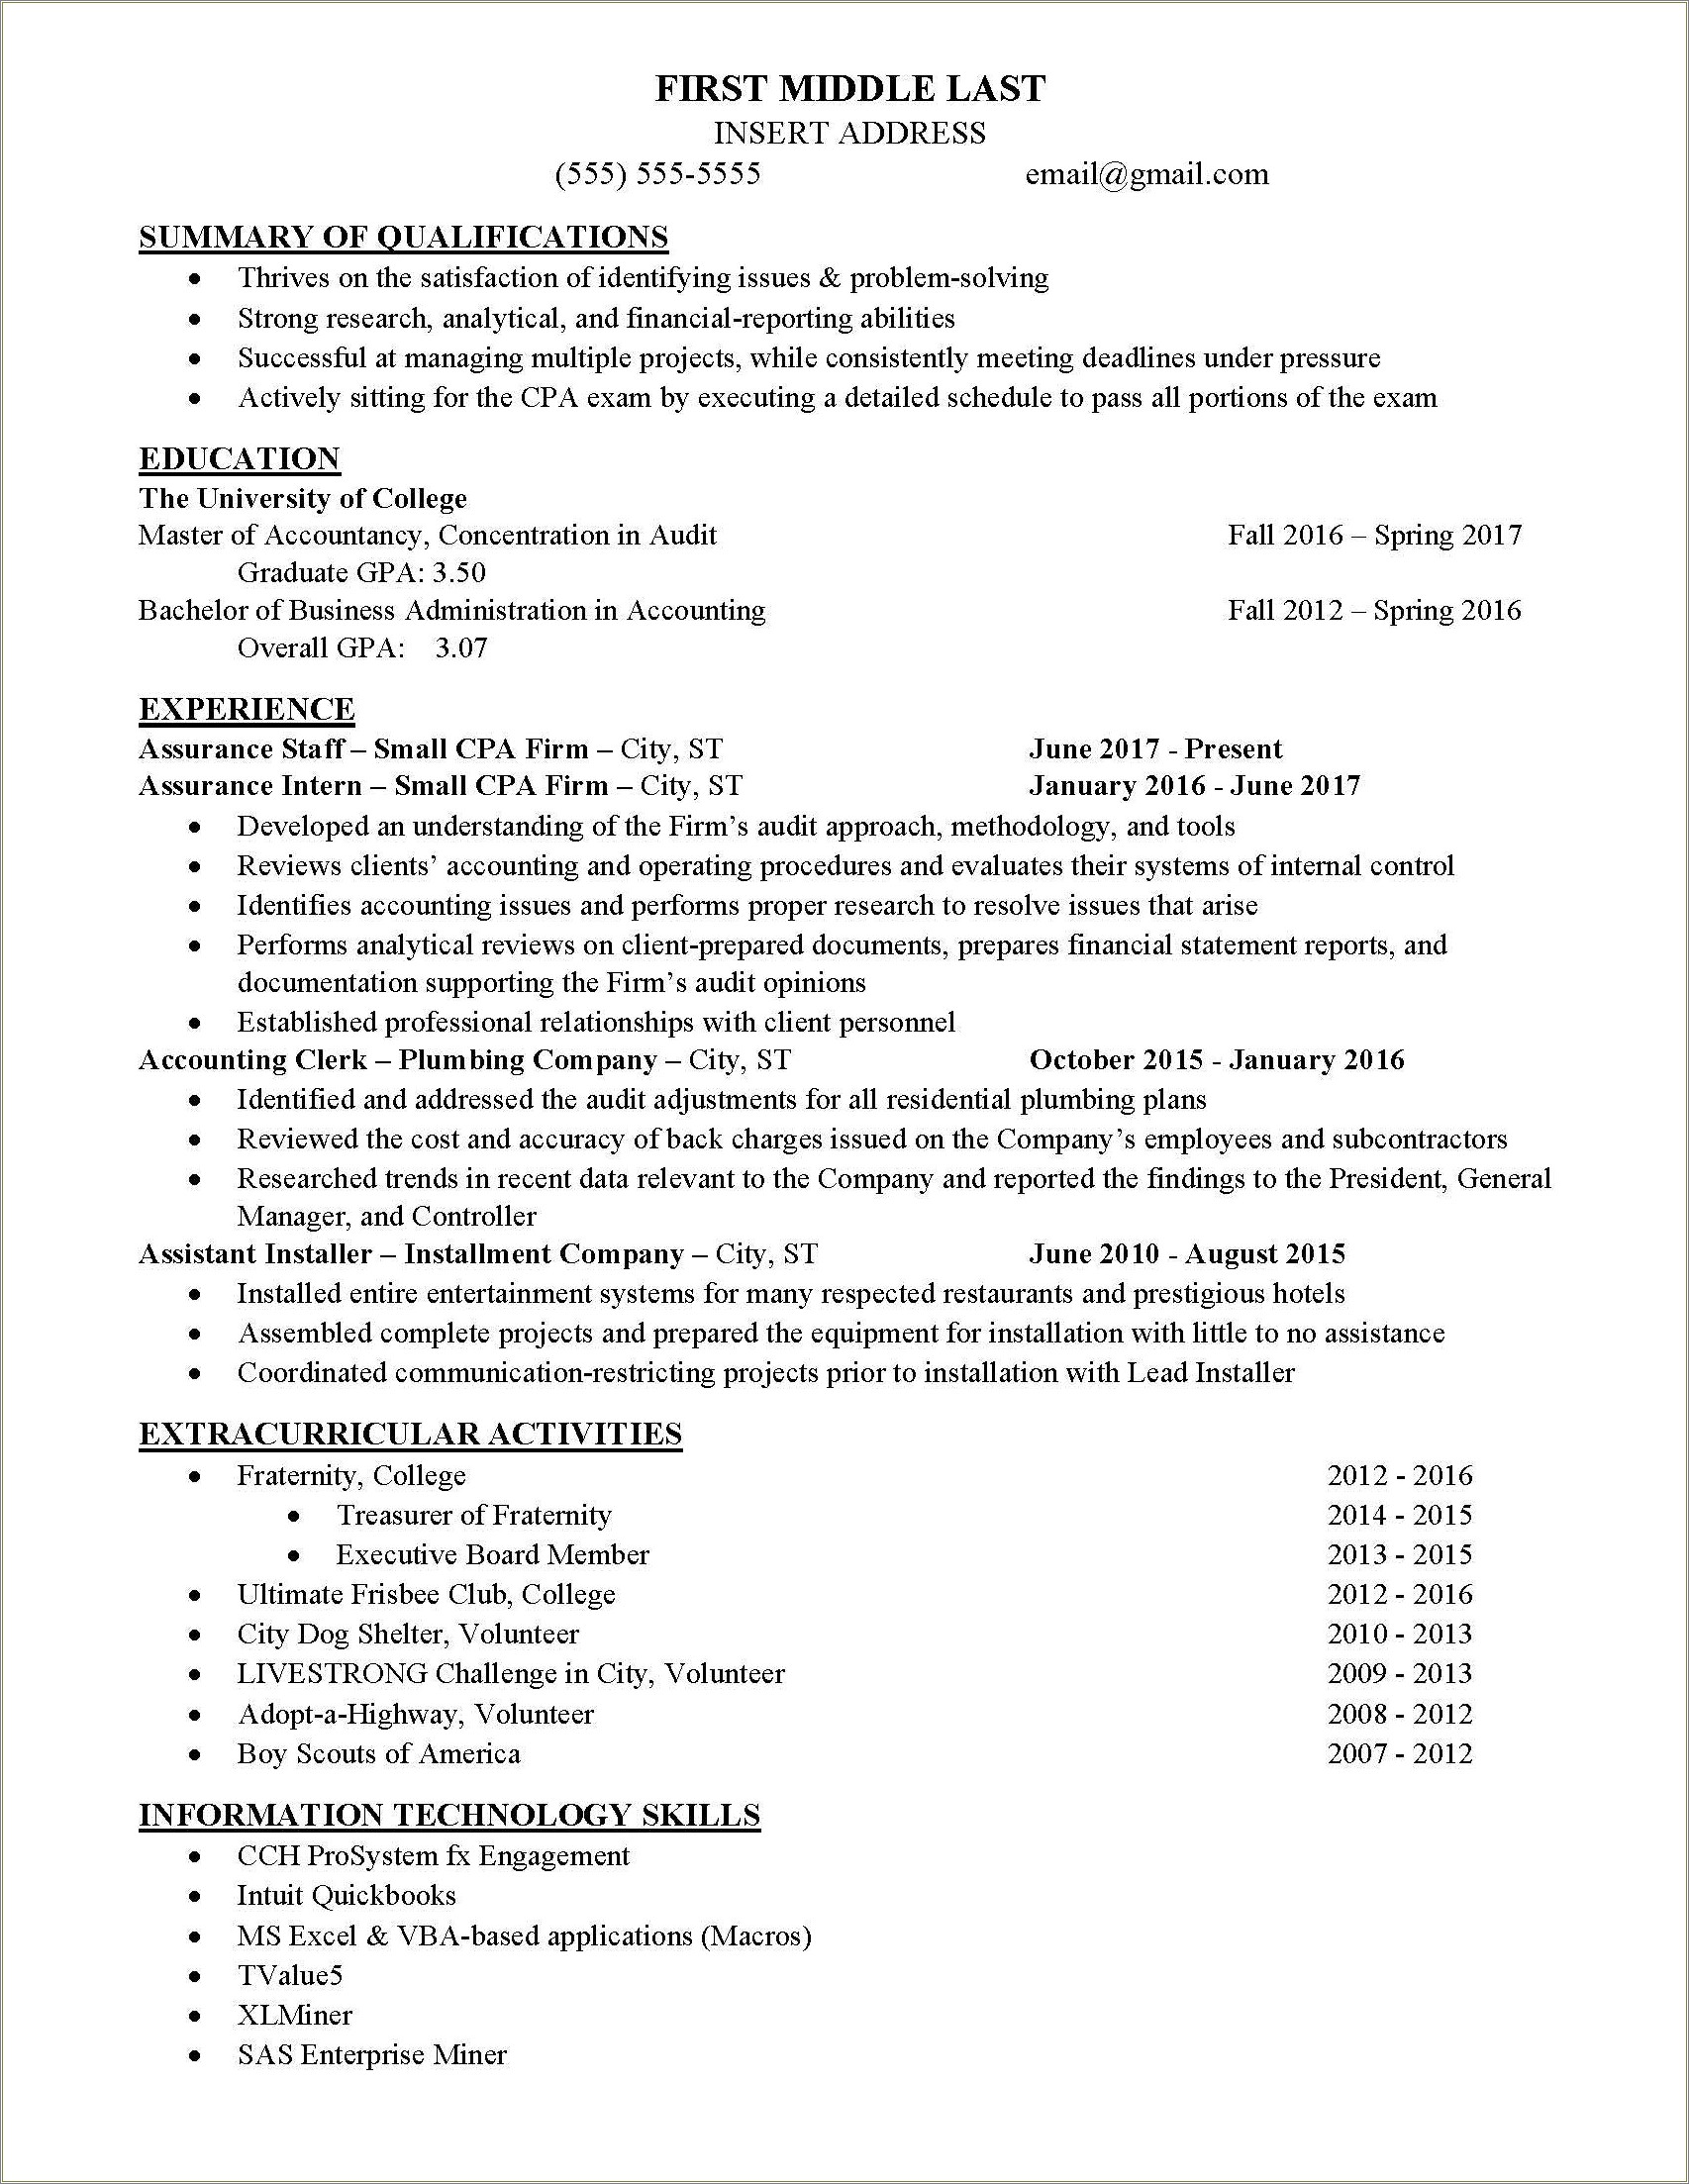 Passed Cpa But Need Experience Resume